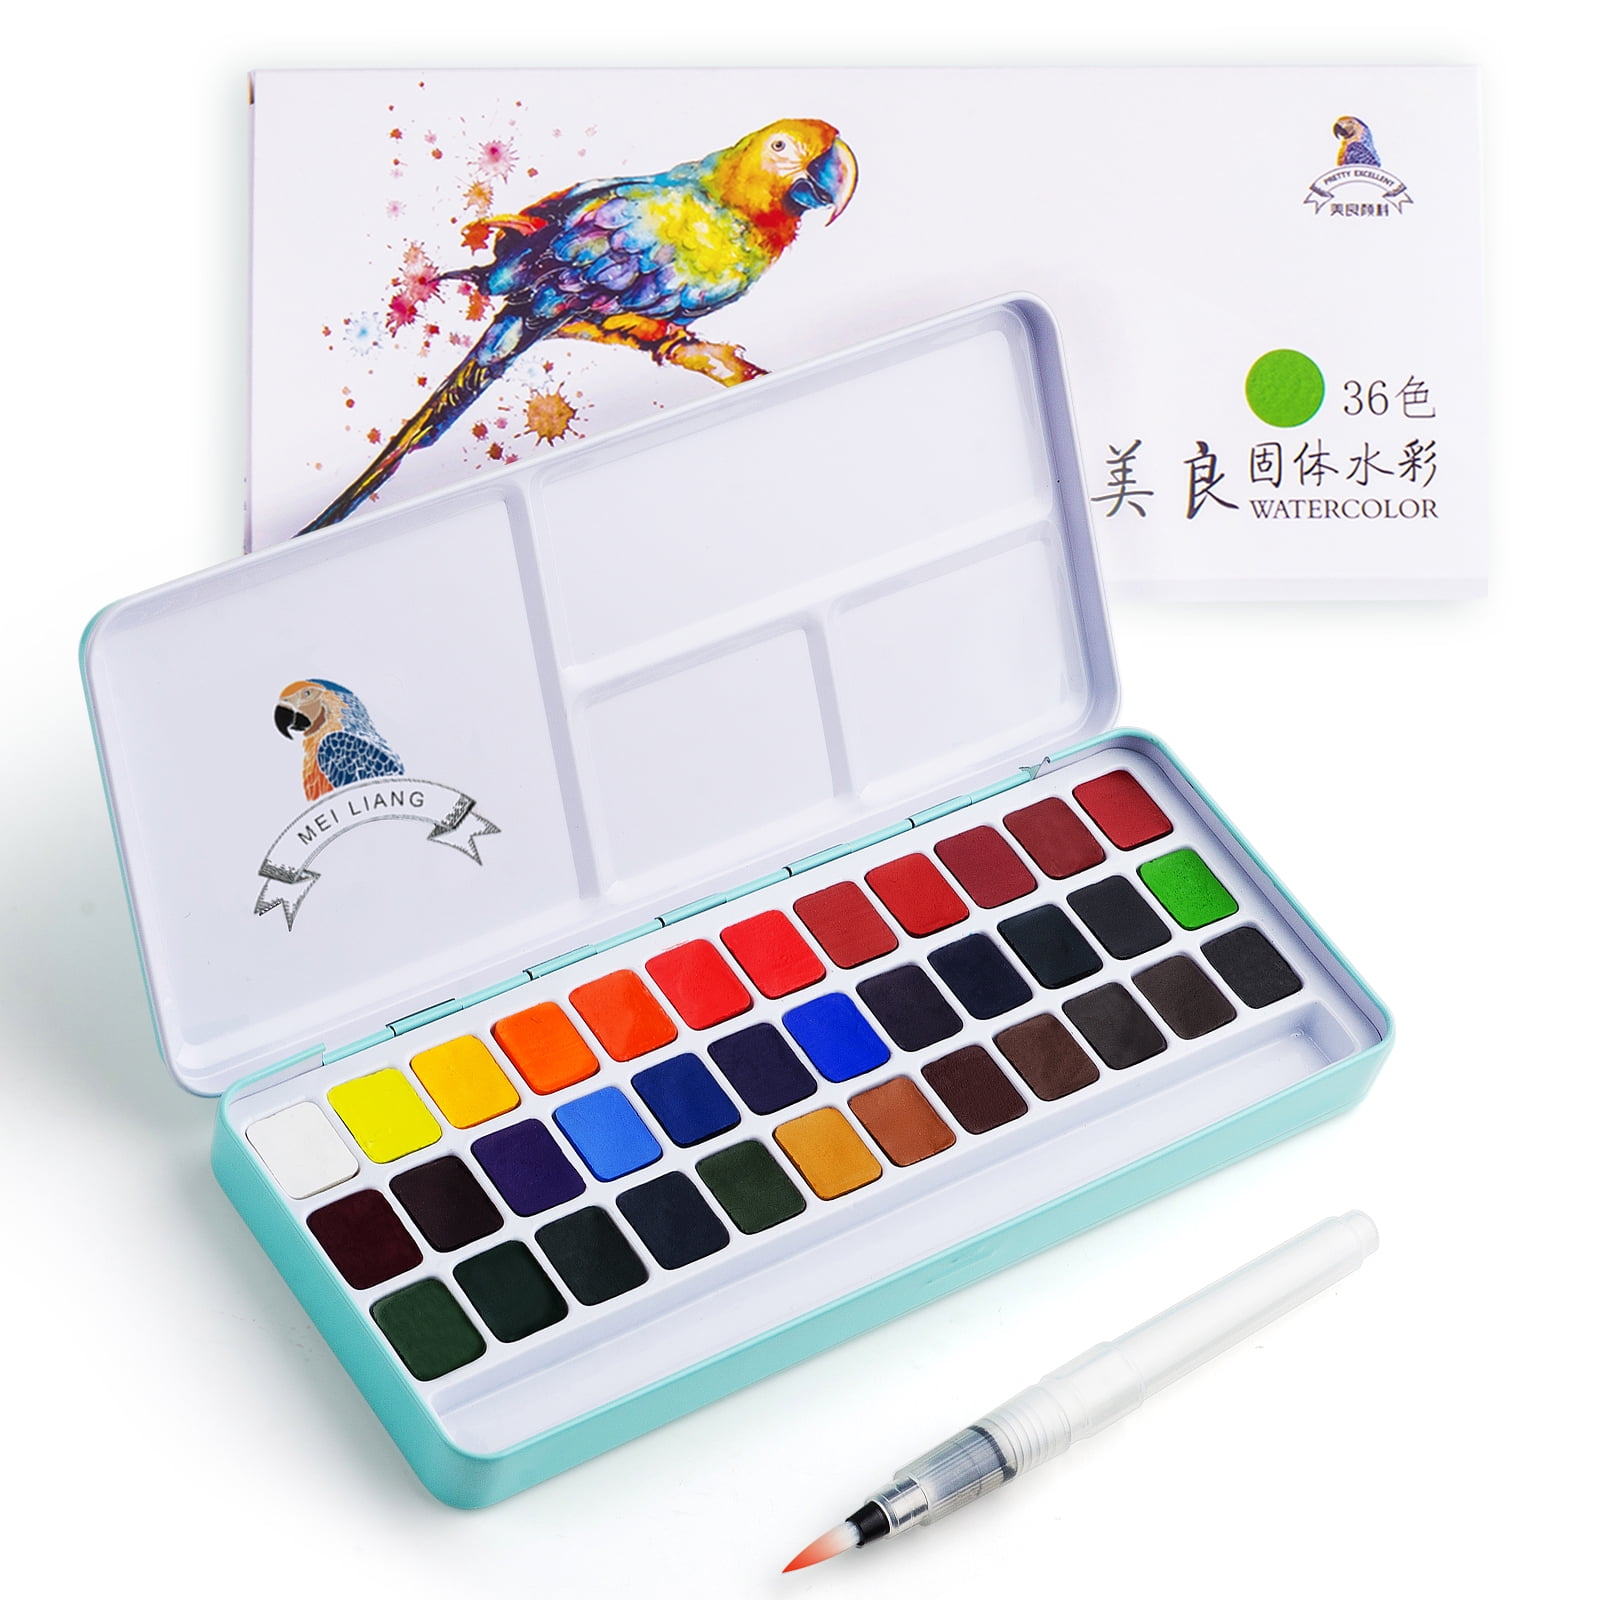 MeiLiang Watercolor Paint Set, 48 Vivid Colors Includes12 Metallic Glitter Solid Colors in Pocket Box with Metal Ring and Watercolor Brush, Perfect As